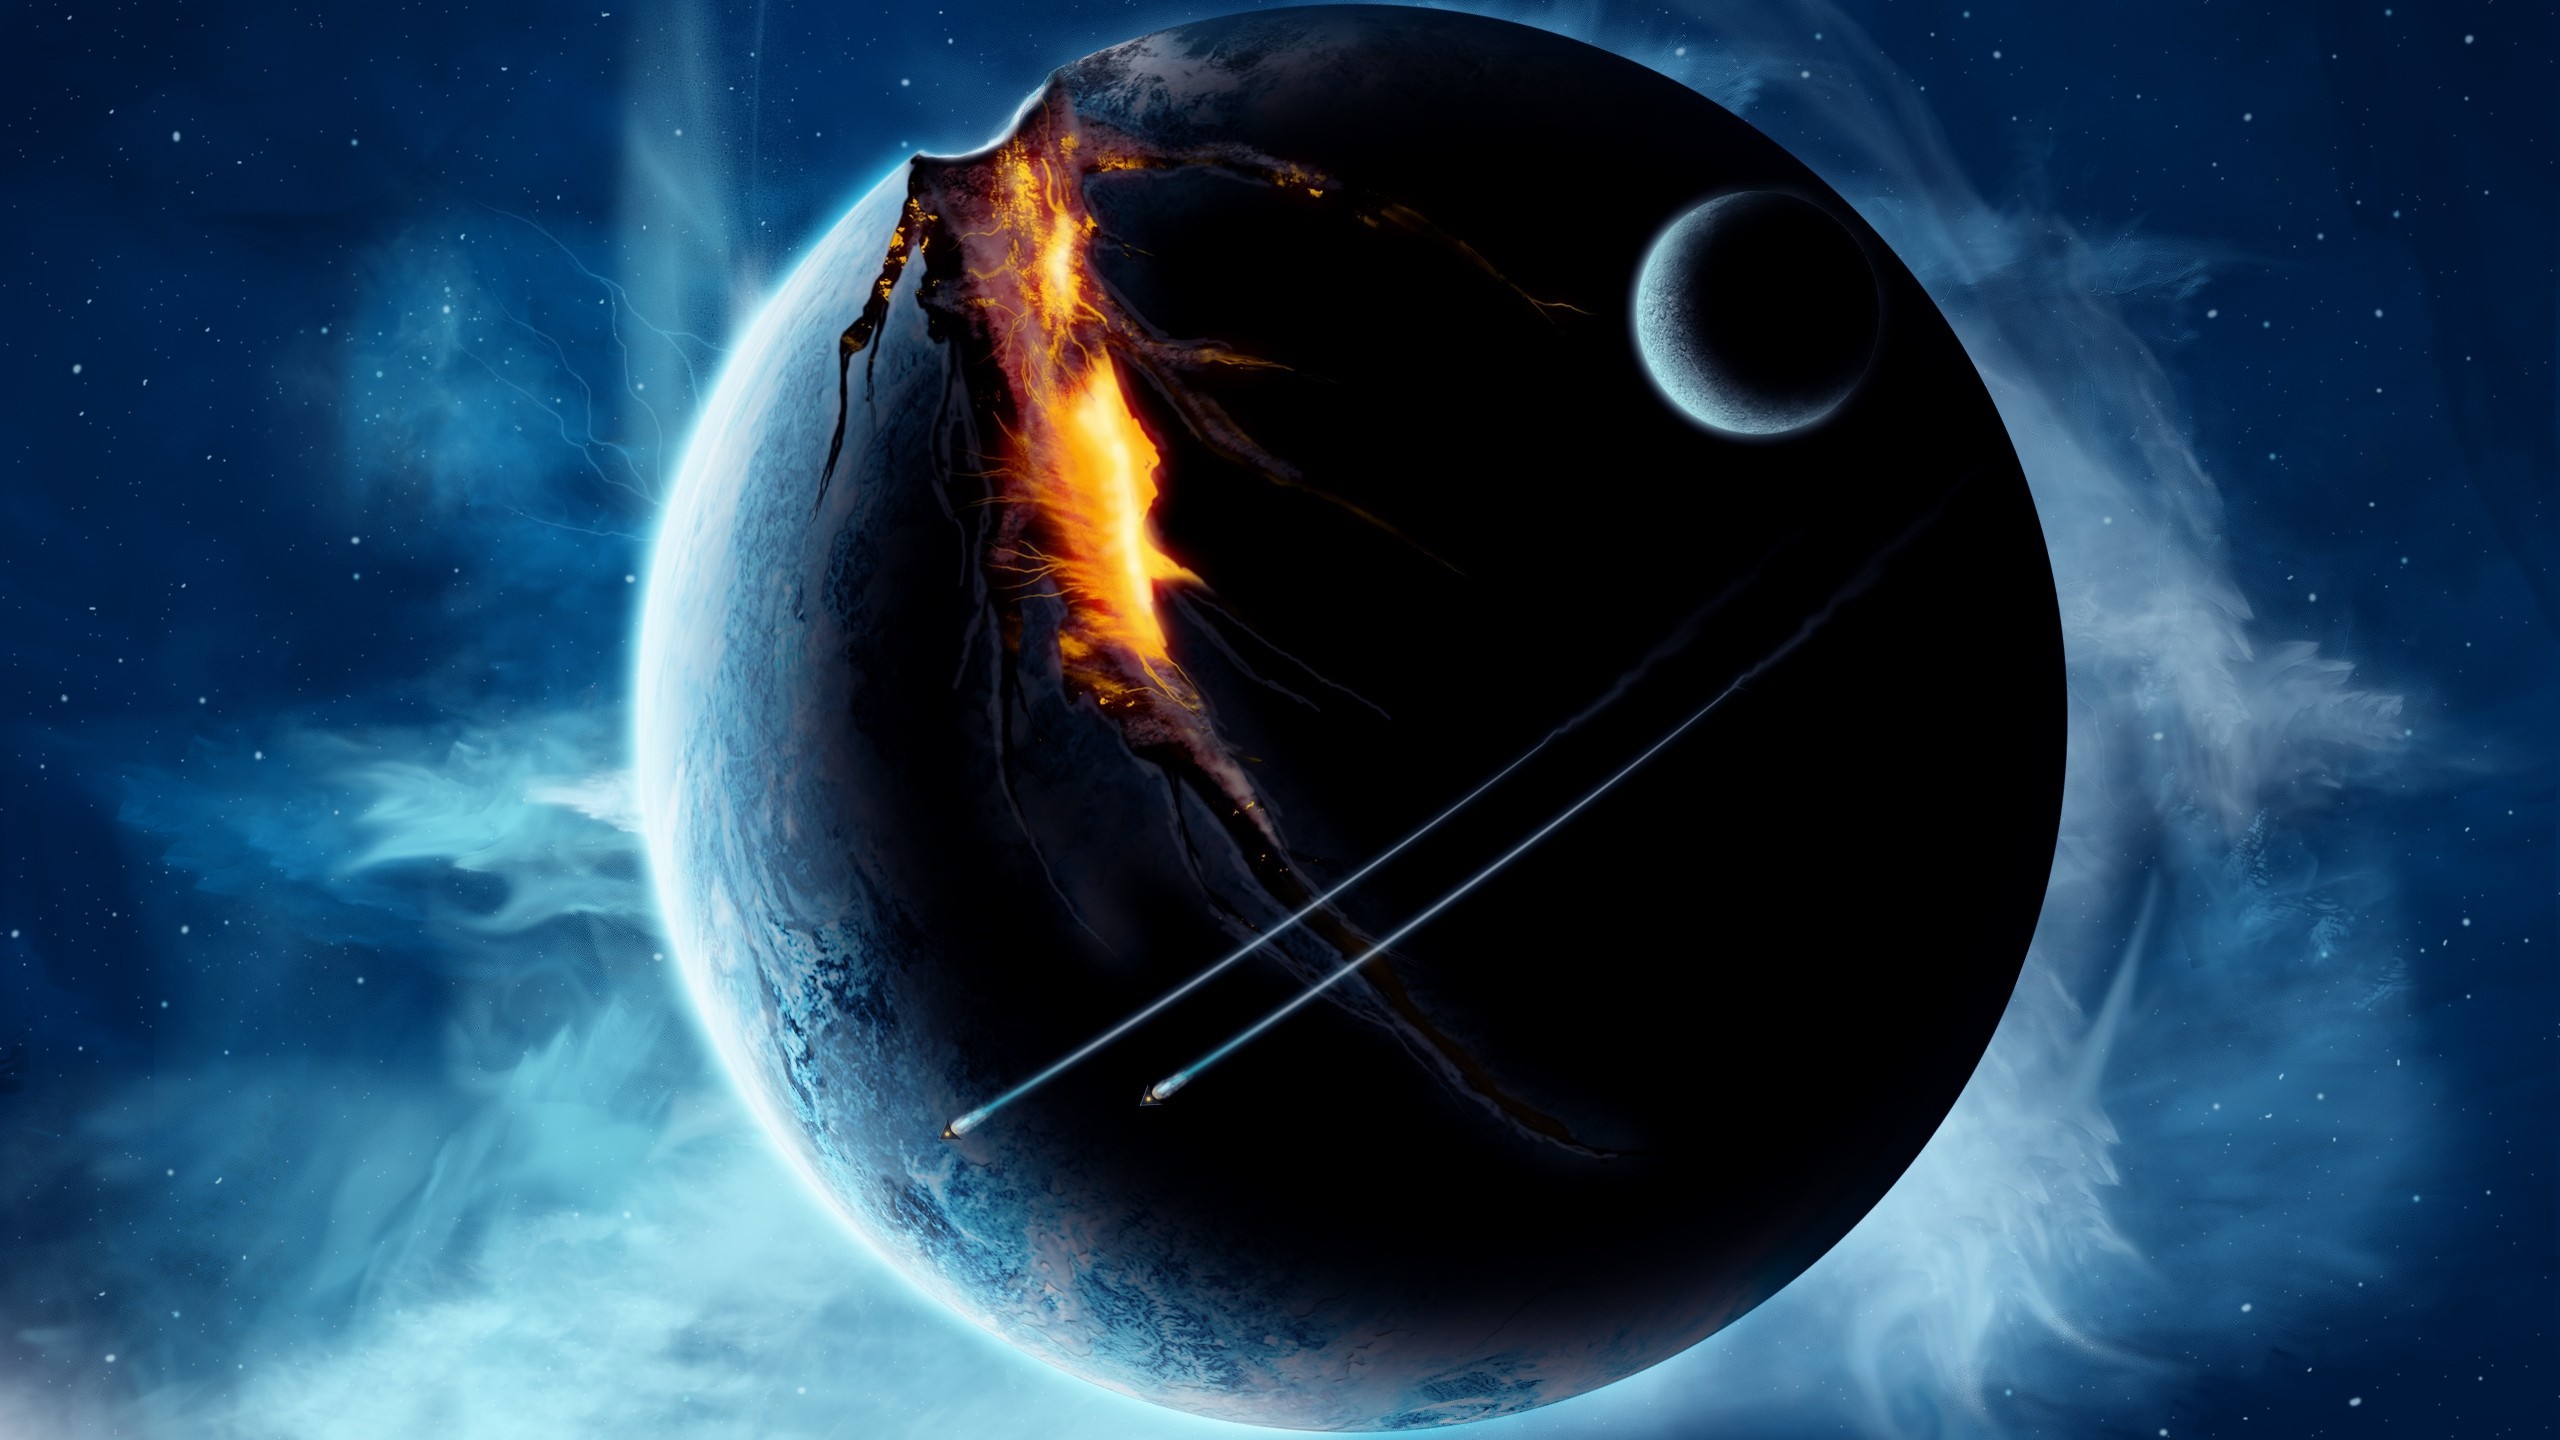 General 2560x1440 science fiction space art space planet apocalyptic digital art nebula